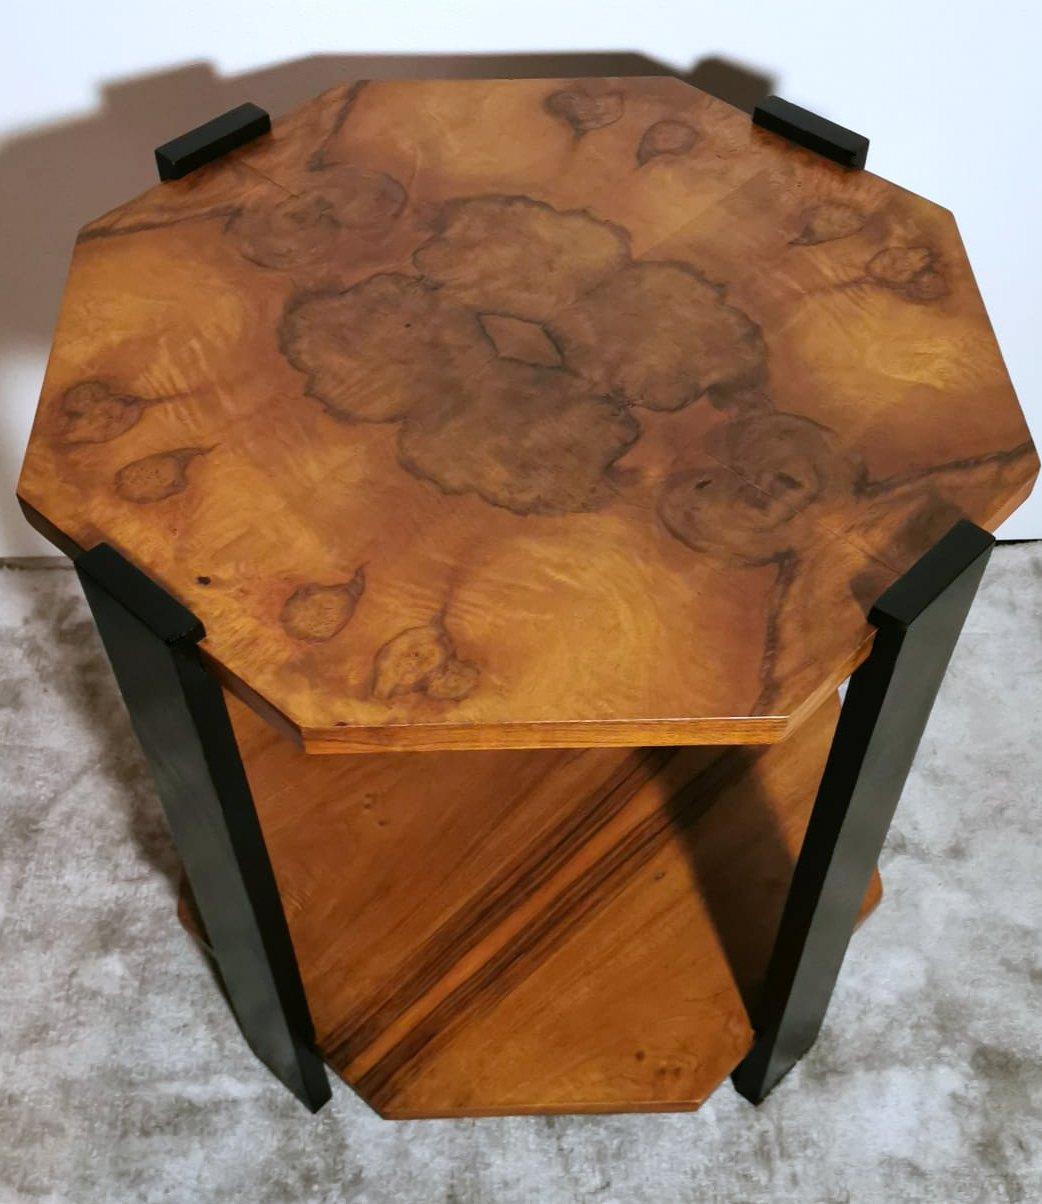 We kindly suggest that you read the entire description, as with it we try to give you detailed technical and historical information to ensure the authenticity of our objects.
A peculiar and elegant tea table made in Art Deco style with flamed